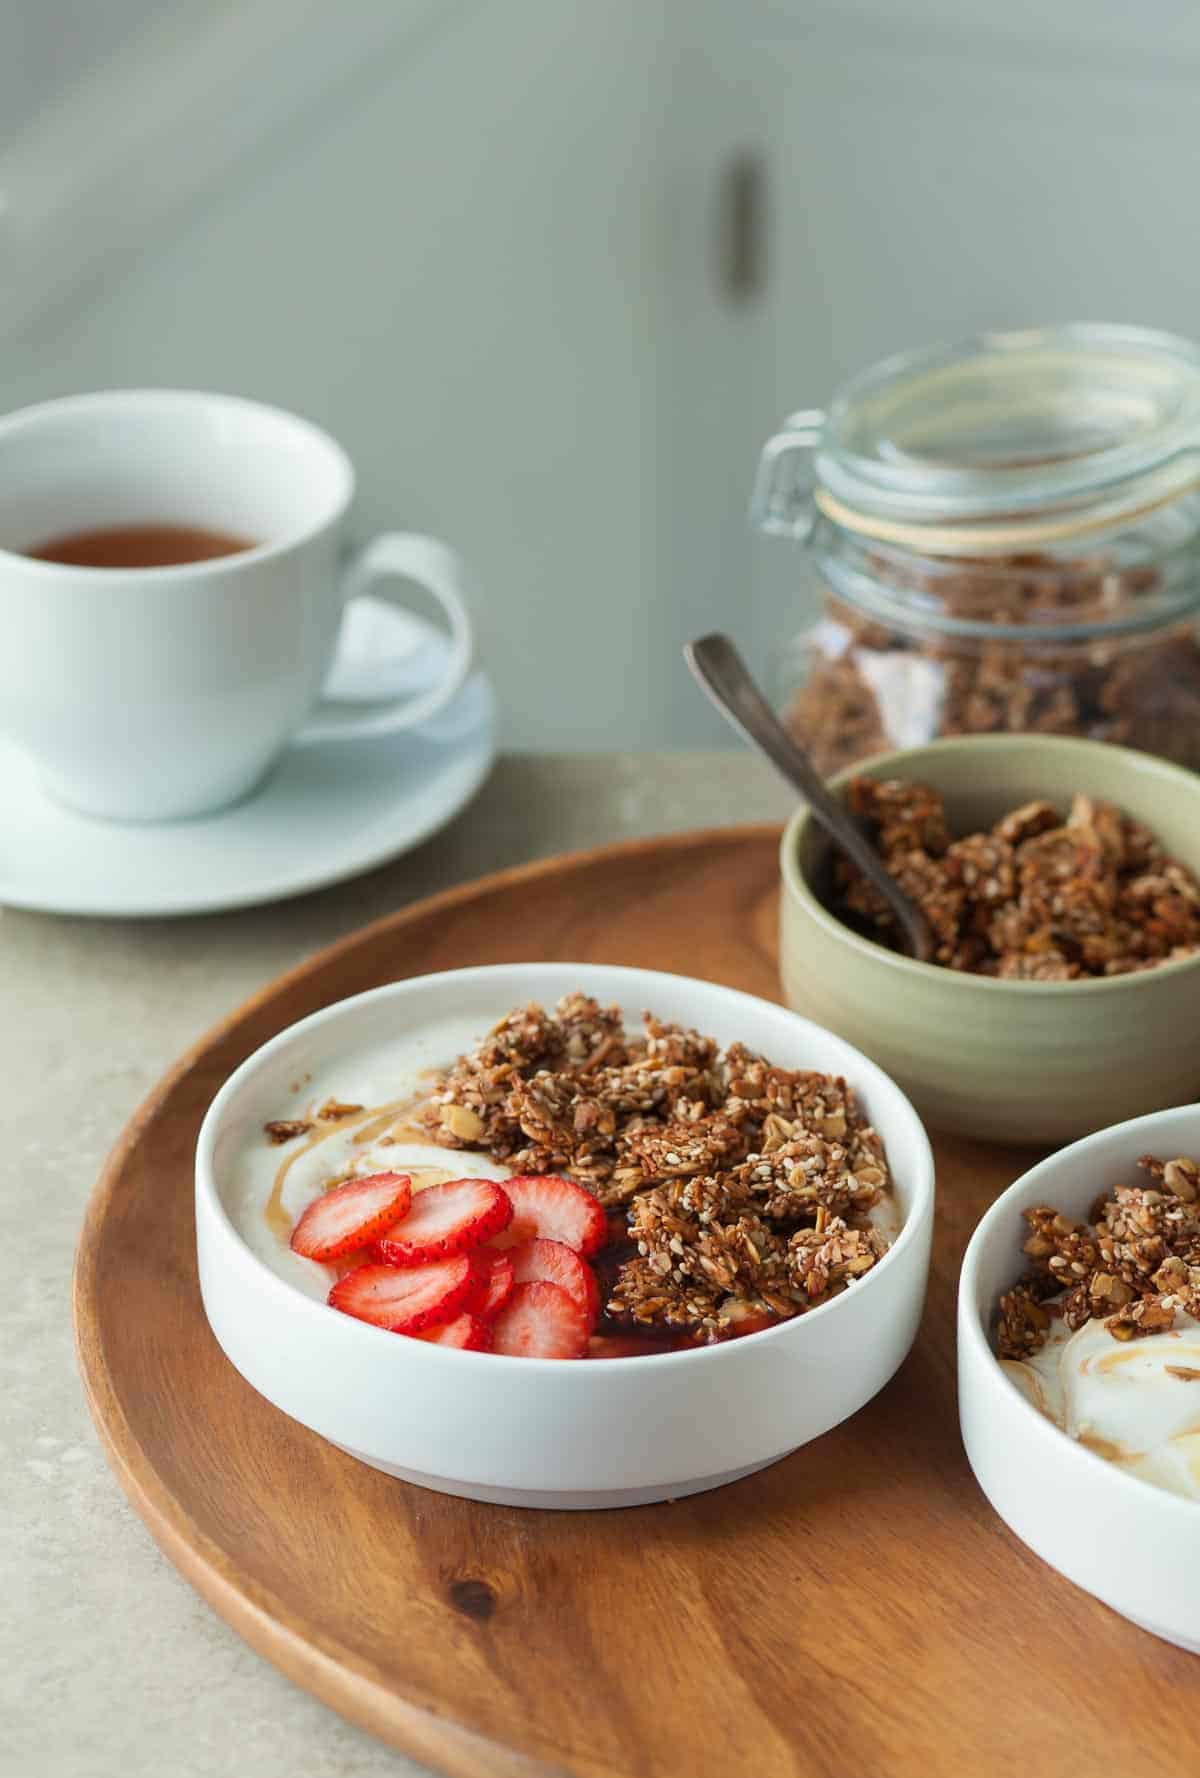 Nut-Free, Grain-Free Granola Topped with Strawberries